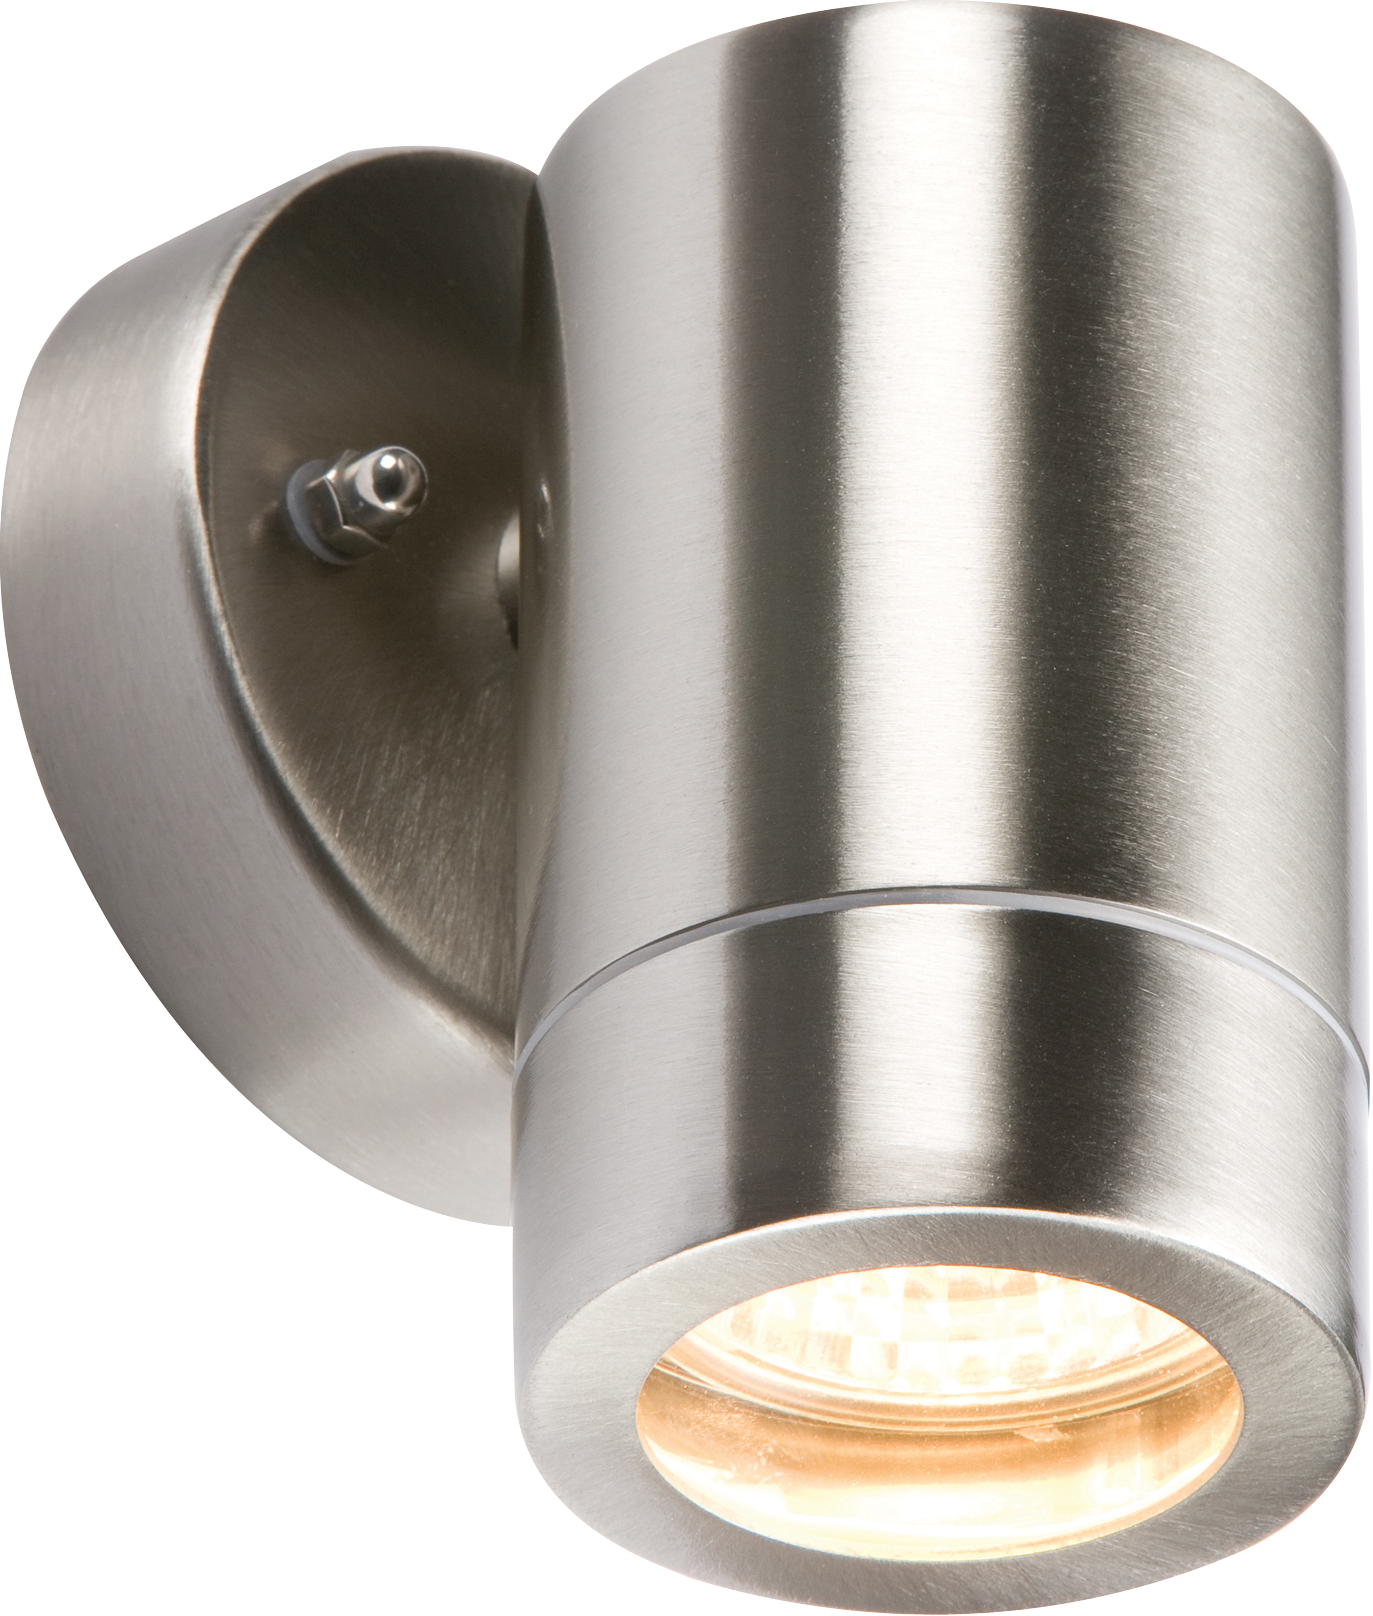 230V IP65 Lightweight Stainless Steel Fixed GU10 35W Fitting - WALL1L 